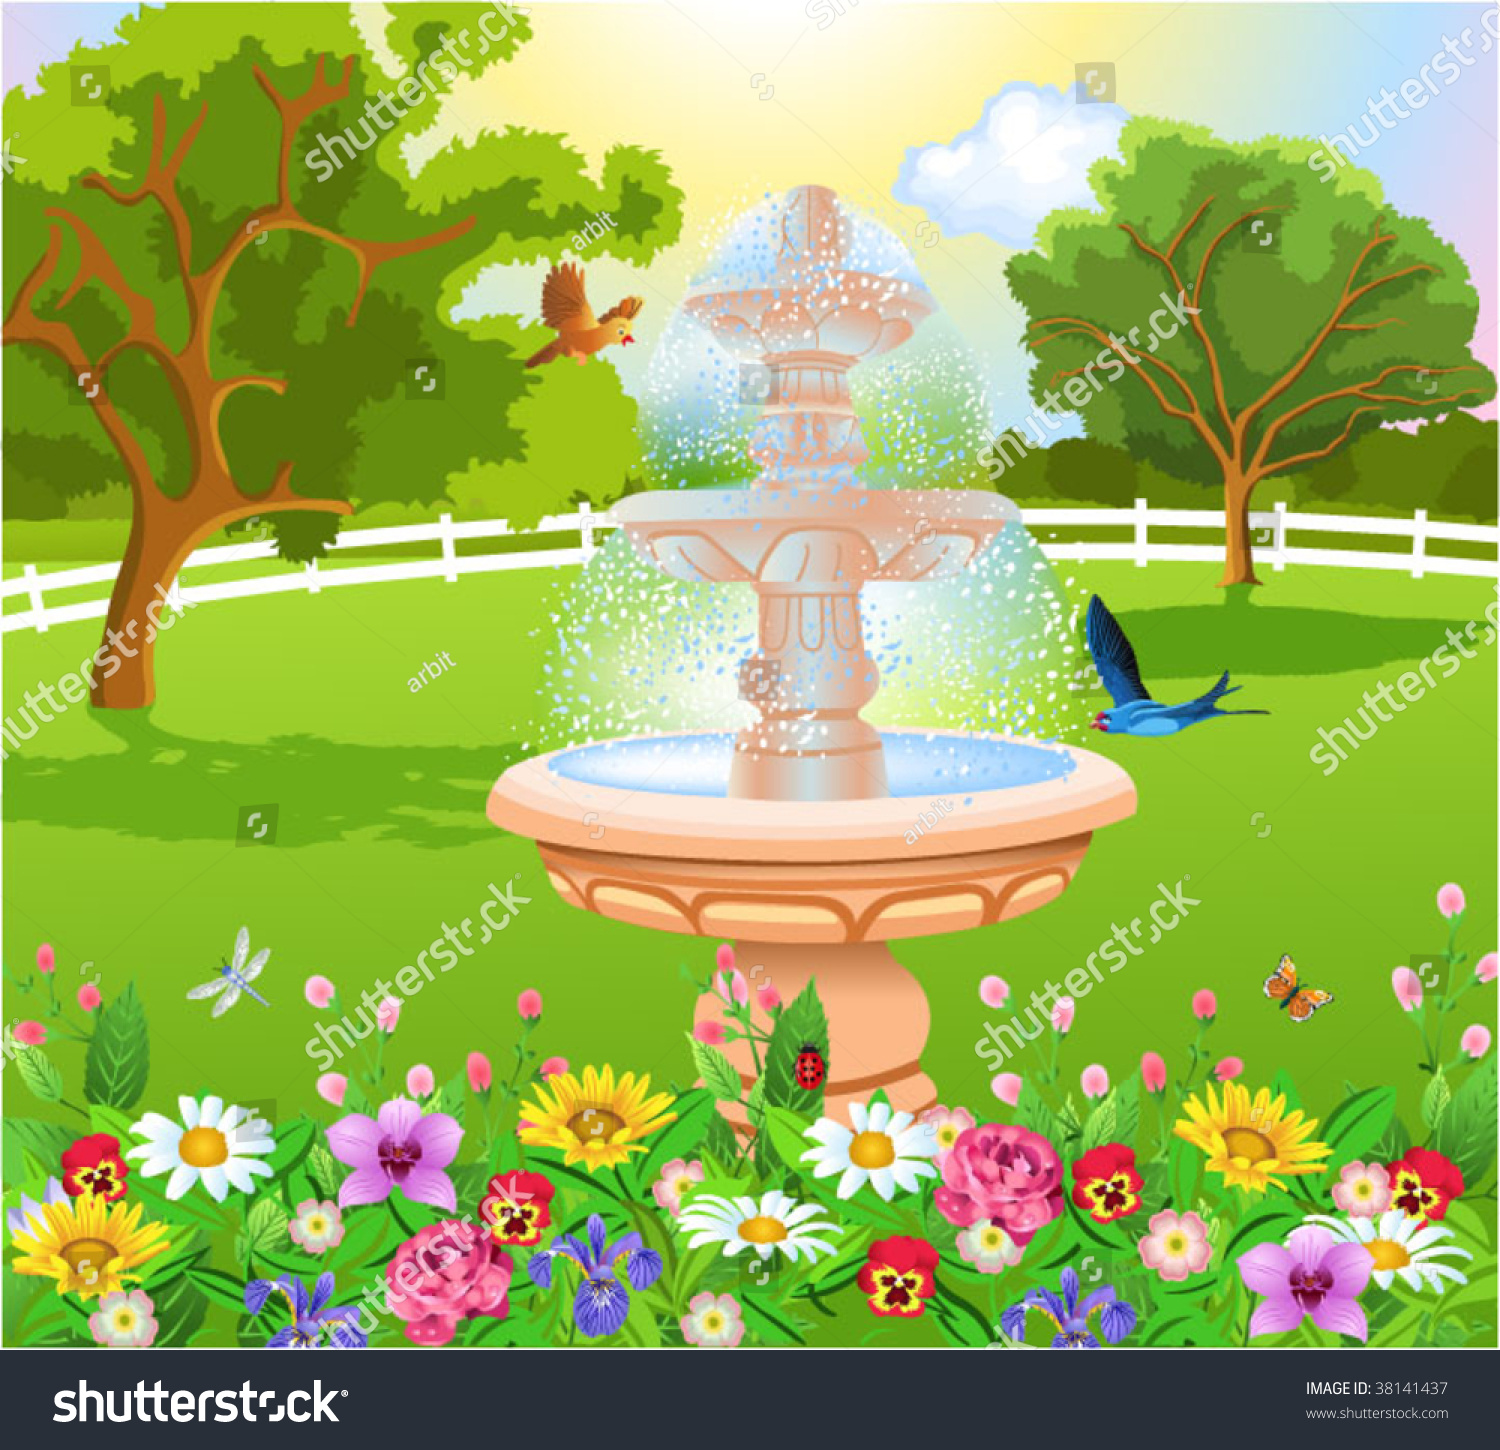 clipart of house with garden - photo #47